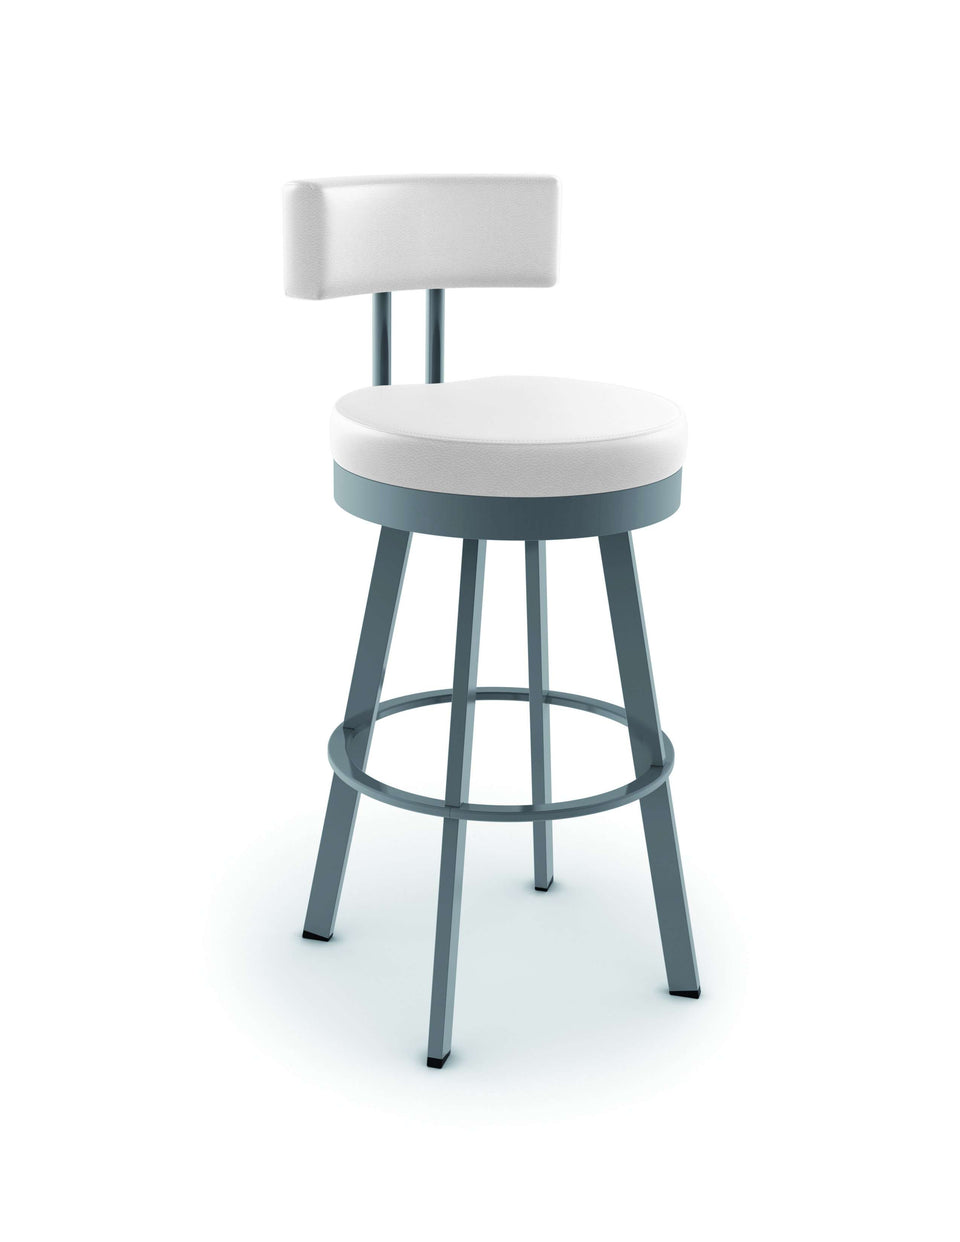 Amisco Barry Swivel Spectator Stool with Upholstered Seat and Backrest